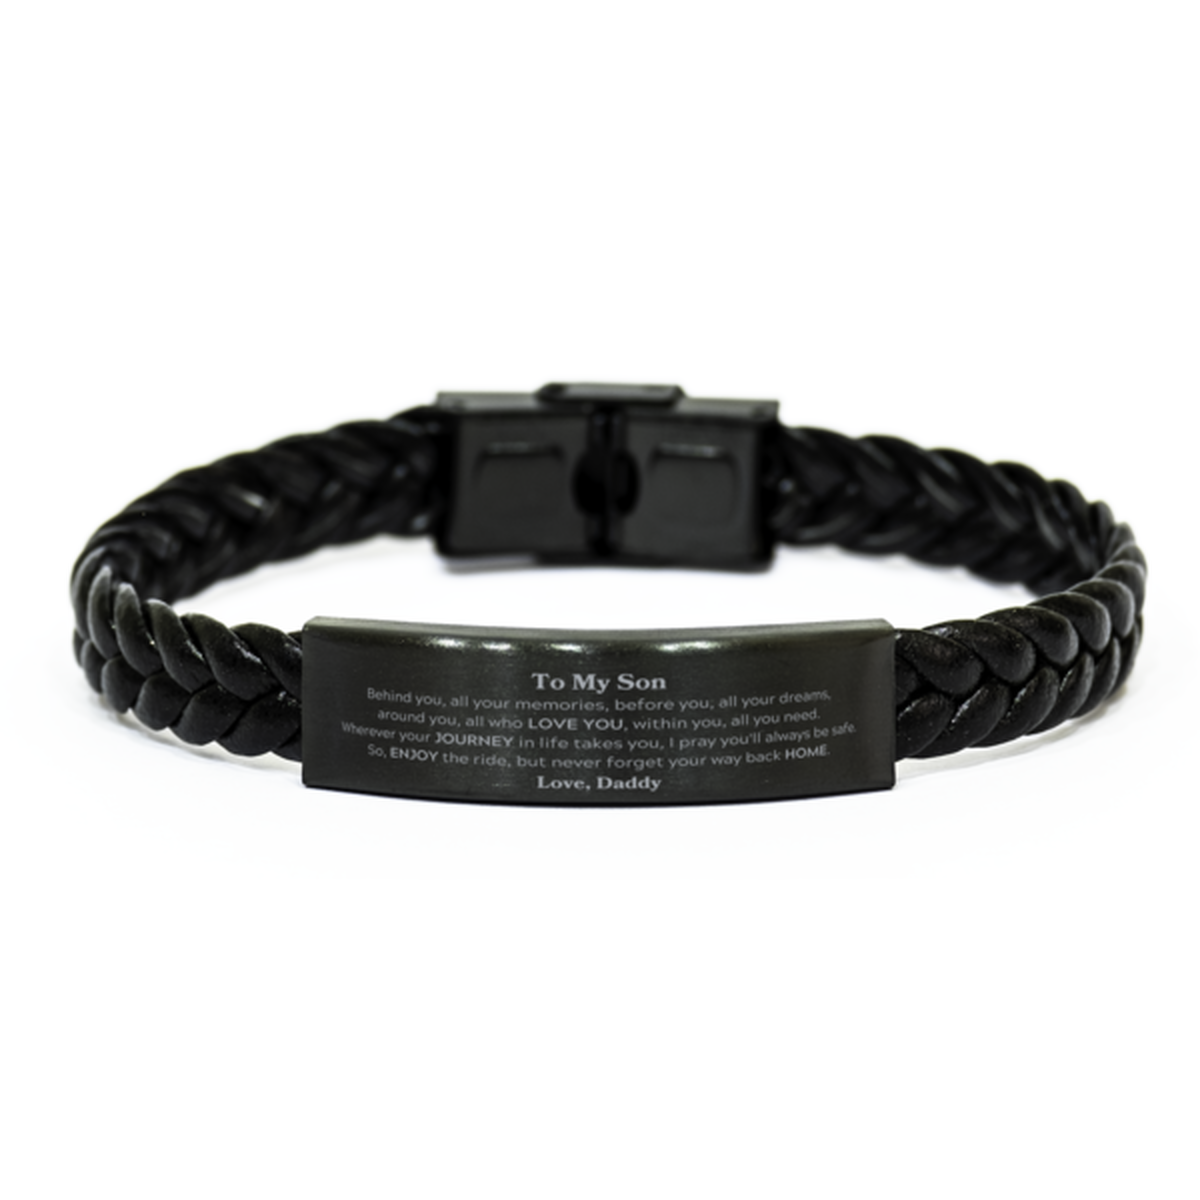 To My Son Graduation Gifts from Daddy, Son Braided Leather Bracelet Christmas Birthday Gifts for Son Behind you, all your memories, before you, all your dreams. Love, Daddy